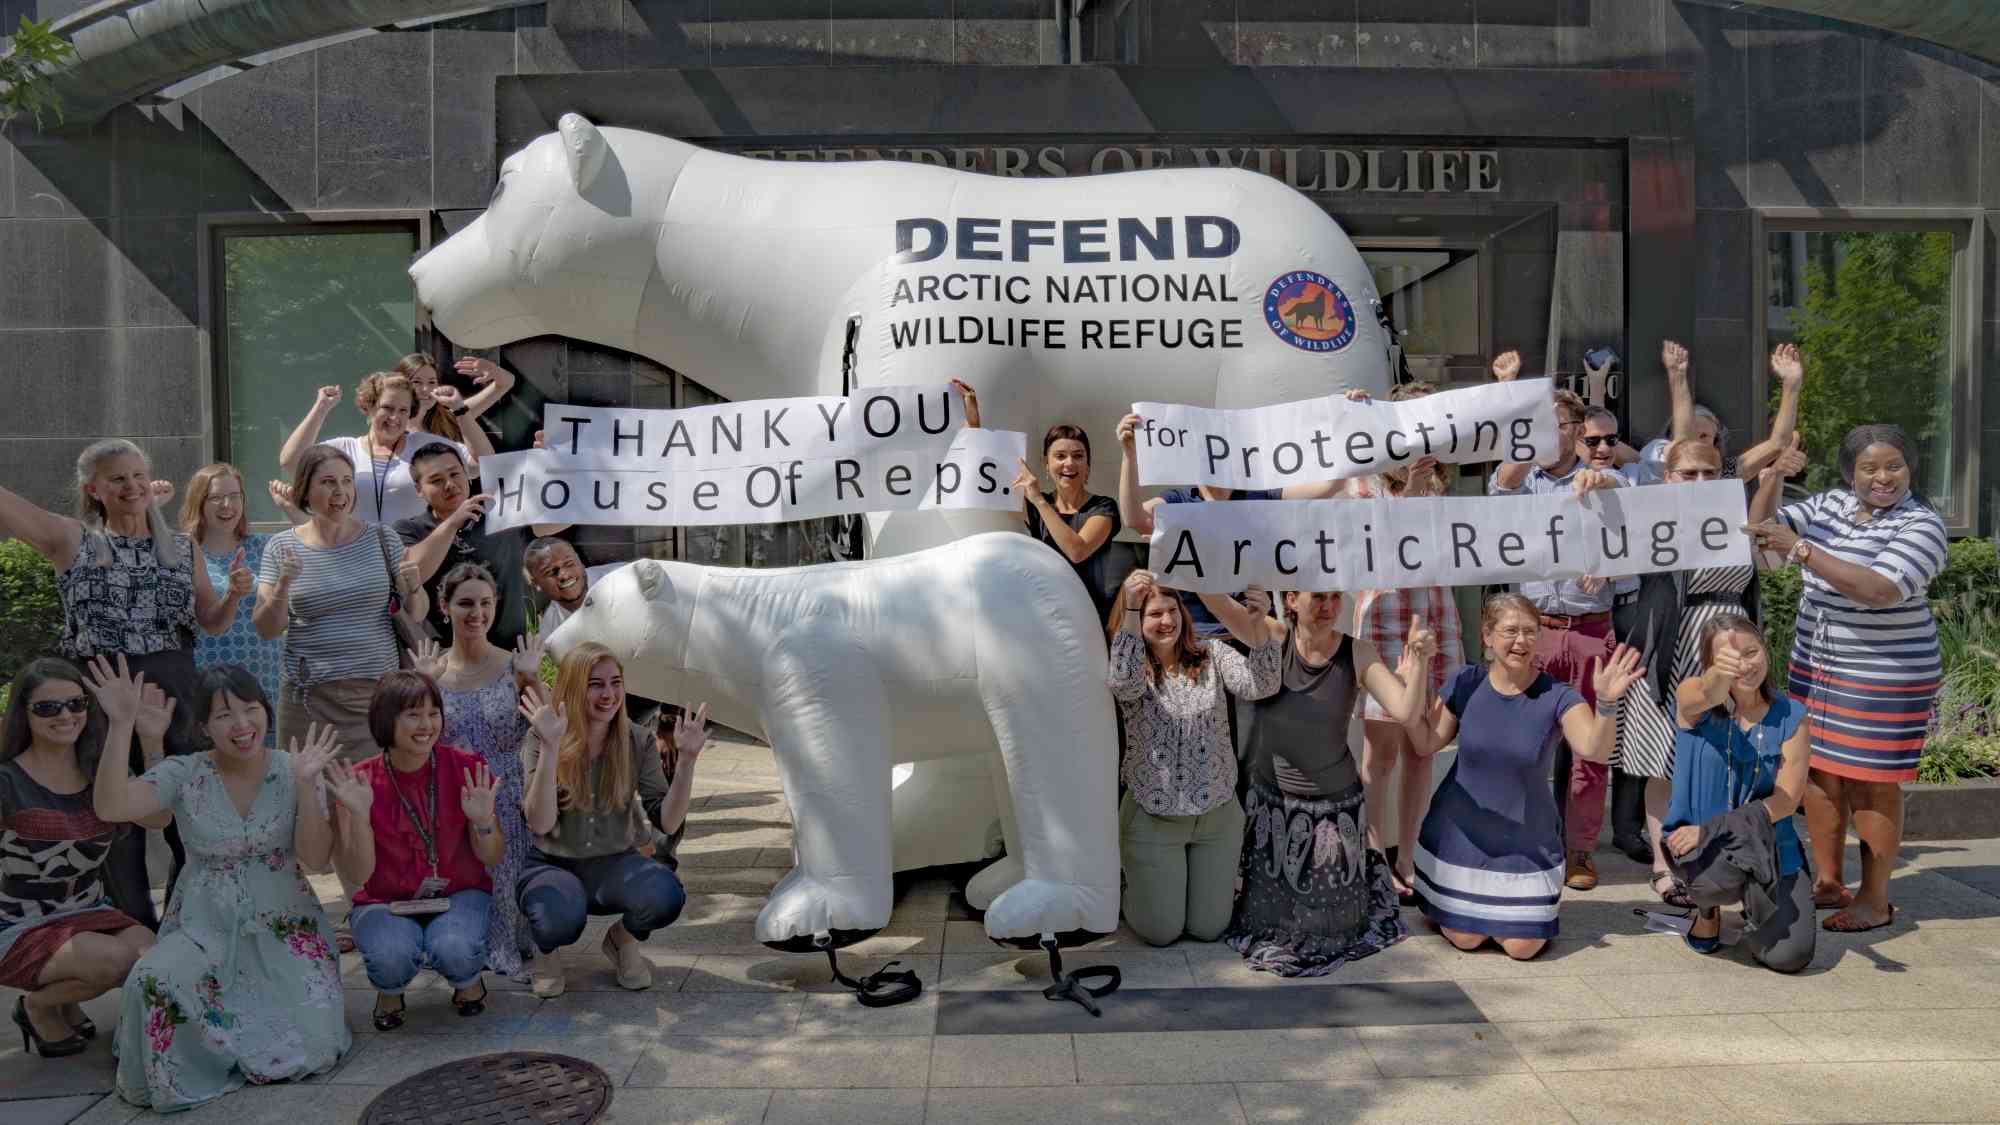 Thank you house of reps in front od DOW with Polar Bears